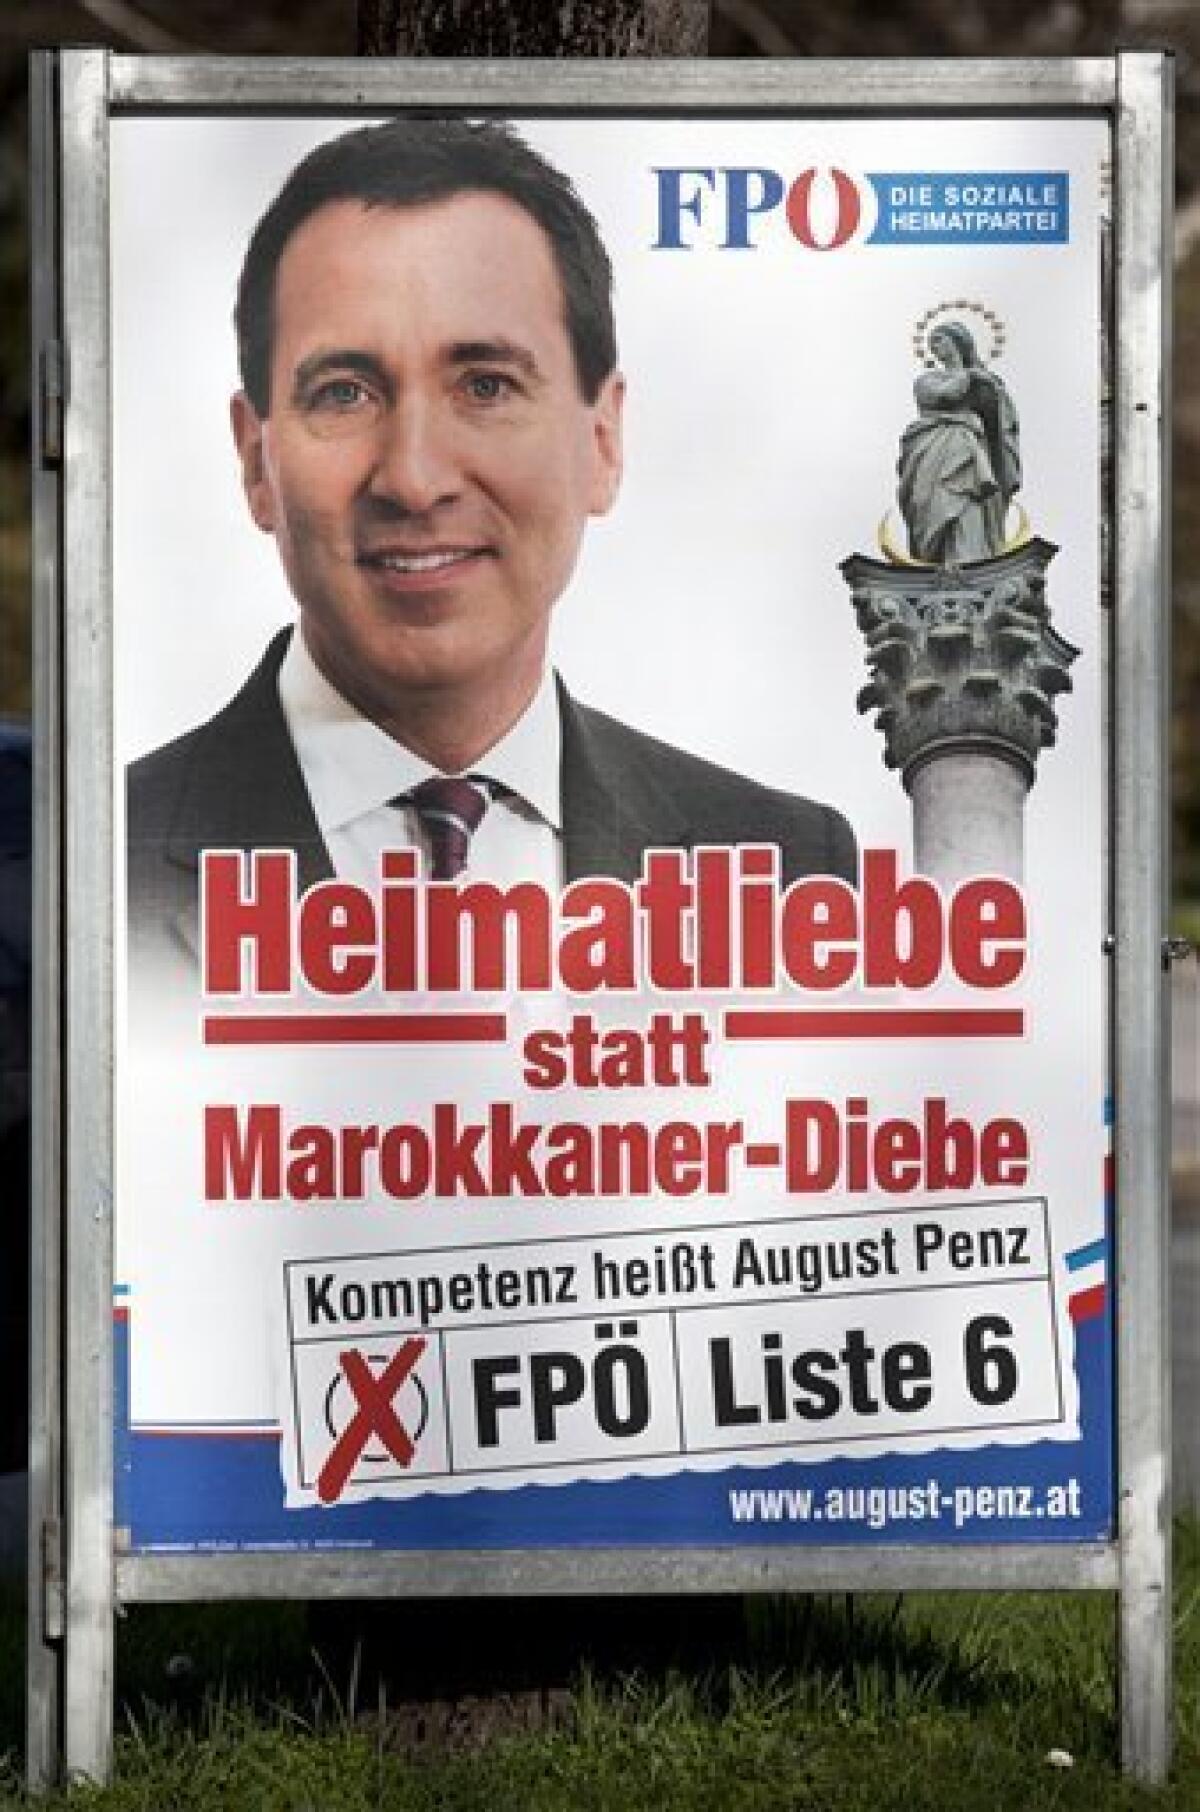 This photo taken Saturday, March 31, 2012 shows an election poster of the far-right Freedom Party, FPOE, in Innsbruck, Austria. The slogan "Heimatliebe statt Marokkaner-Diebe," set up for local elections in Innsbruck translates as "Love of your home country instead of Moroccan thieves." August Penz, head of the Innsbruck chapter of the rightist Freedom Party, said Sunday, April 1, 2012, all 33 posters have been covered or removed and all will be taken down by midweek. He says in a statement he "never had the intention to insult anyone" and apologizes for the "content and formulation" of the placards. (AP Photo/dapd, Christian Forcher)